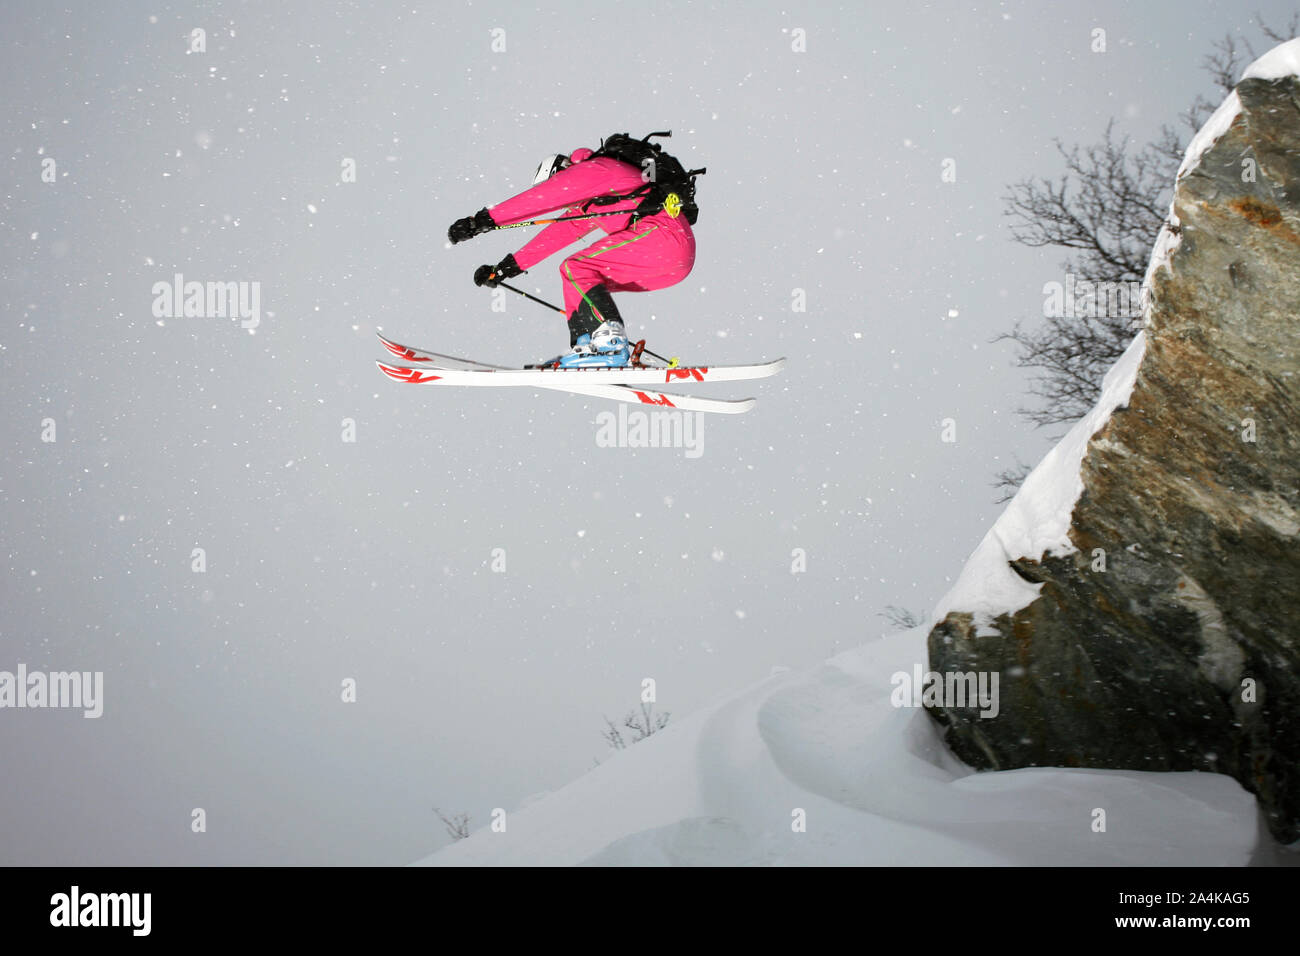 Woman jumping with skis Stock Photo